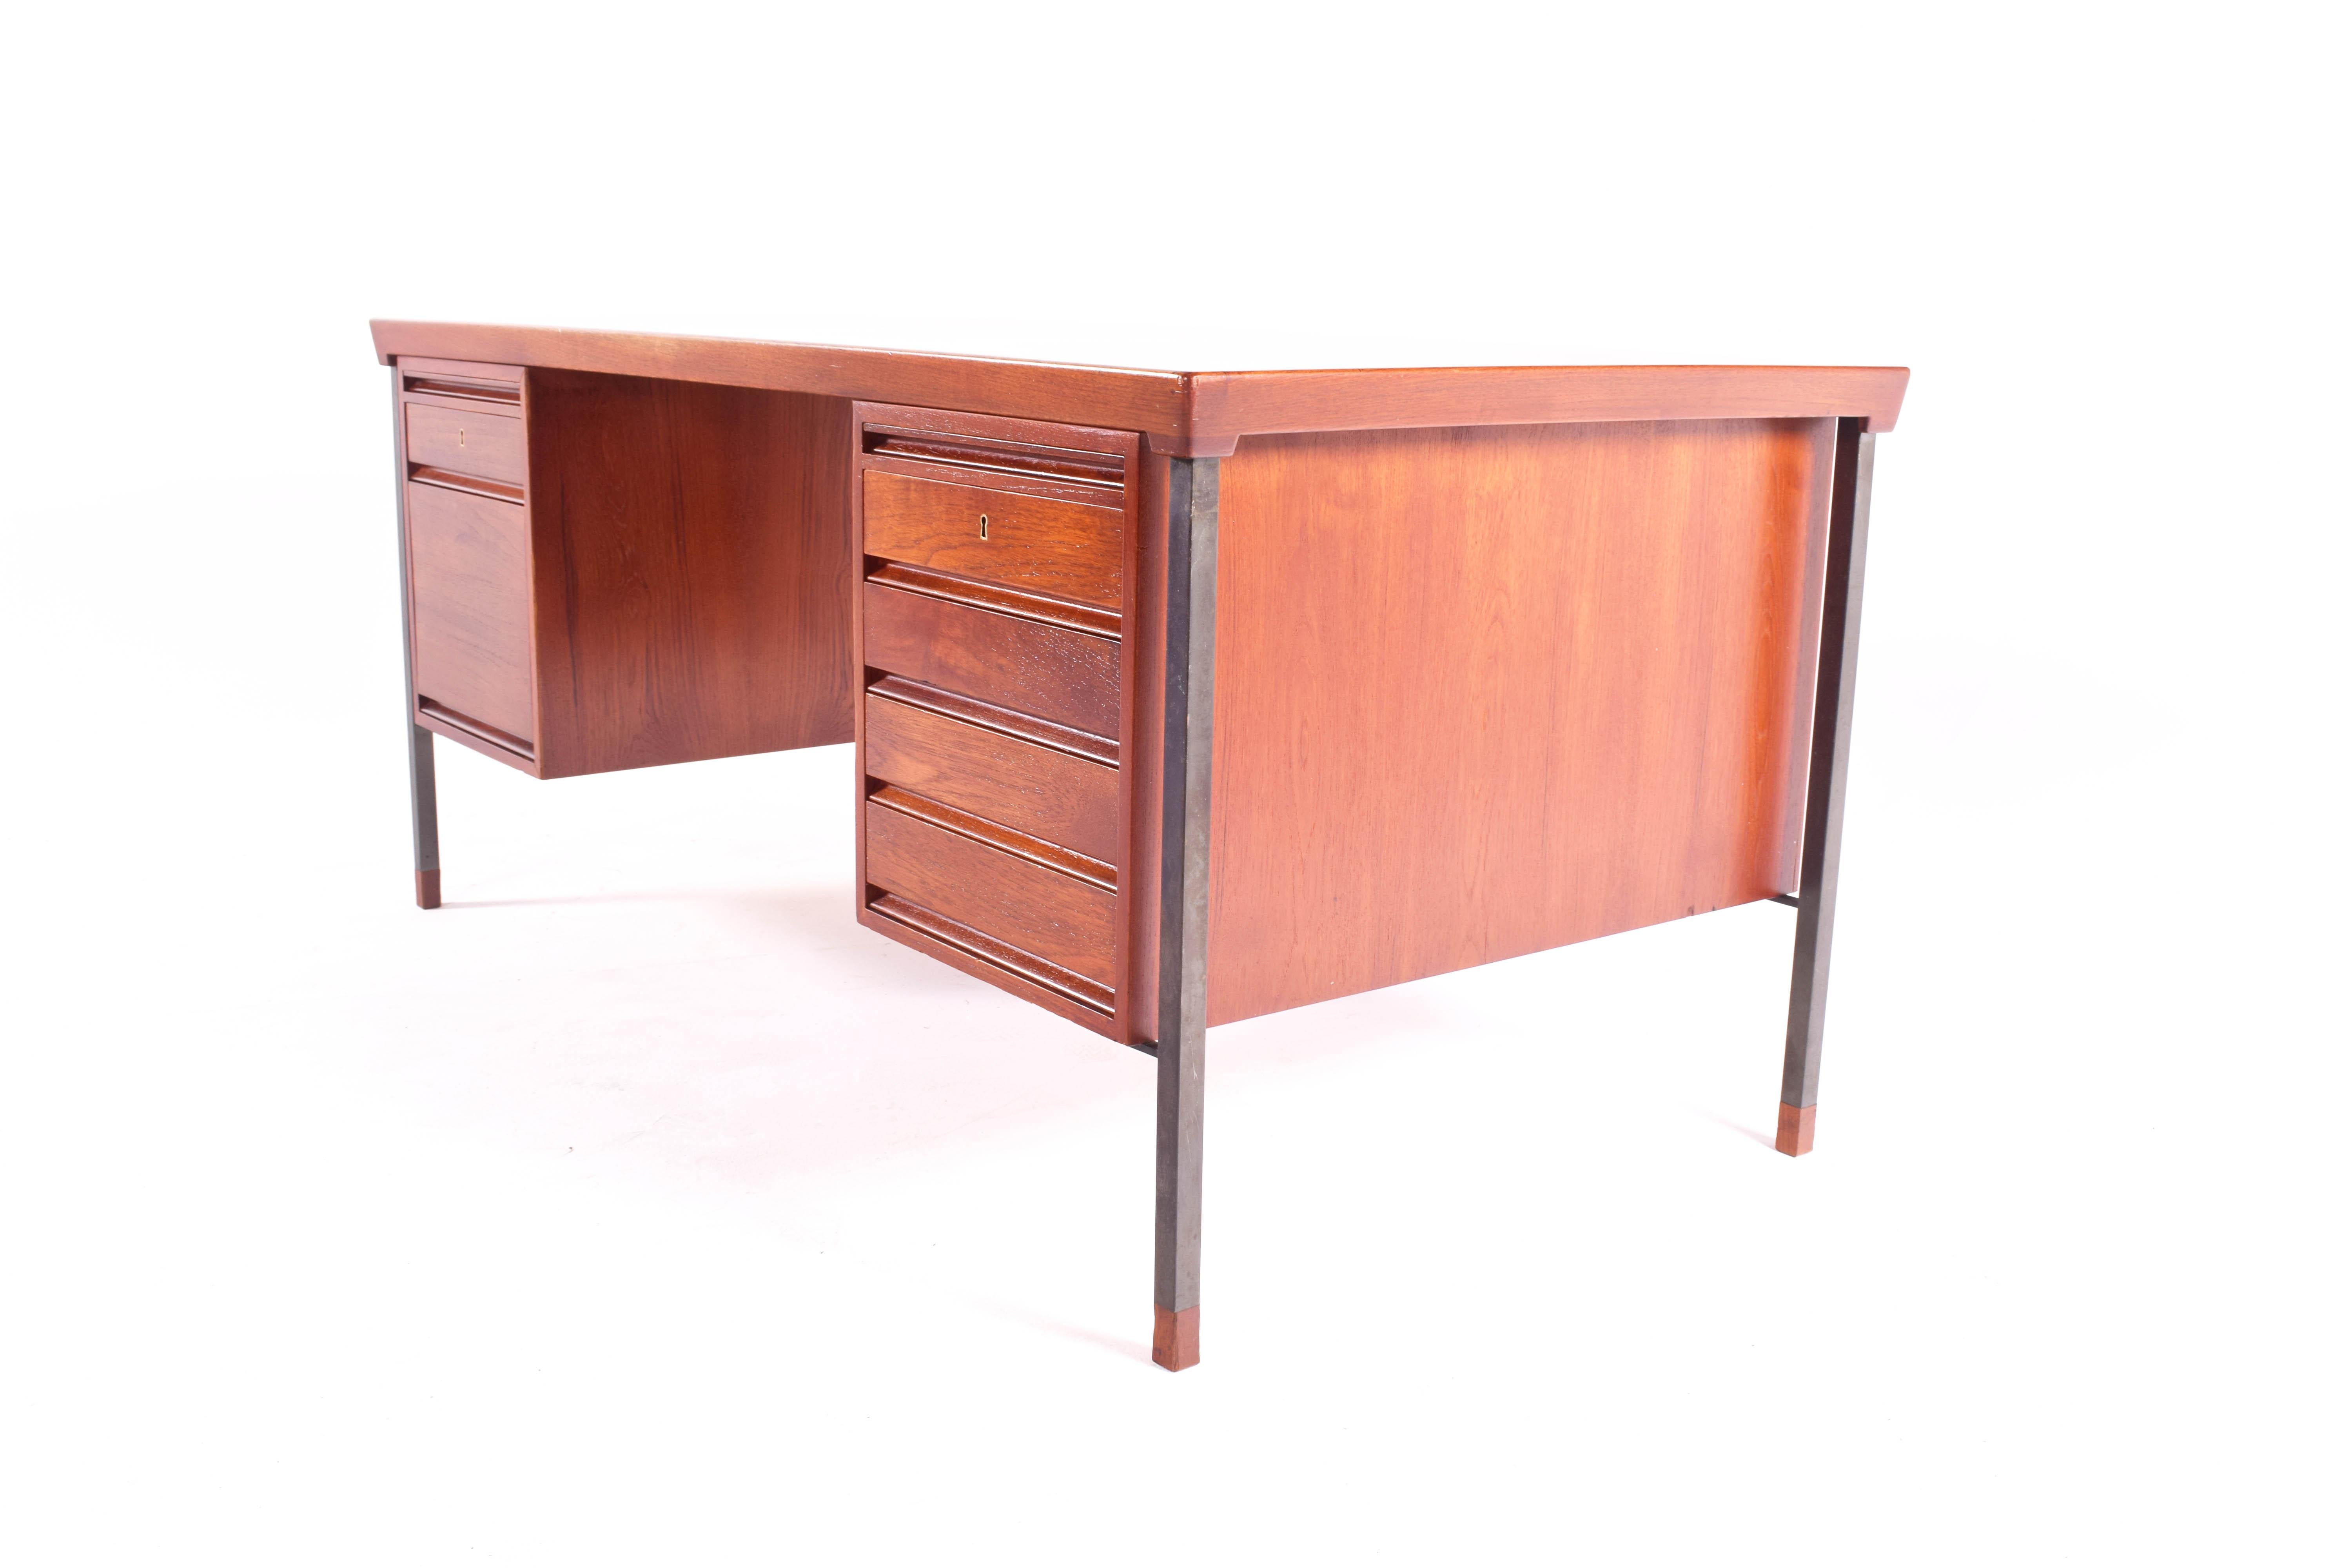 This Danish teak desk was designed by Peter Hvidt and Orla Molgaard-Nielsen for Soborg Mobelfabrik in the 1960s, Denmark. It features six drawers with small removable trays, and two trays that slide out. This desk is finished on both sides, and